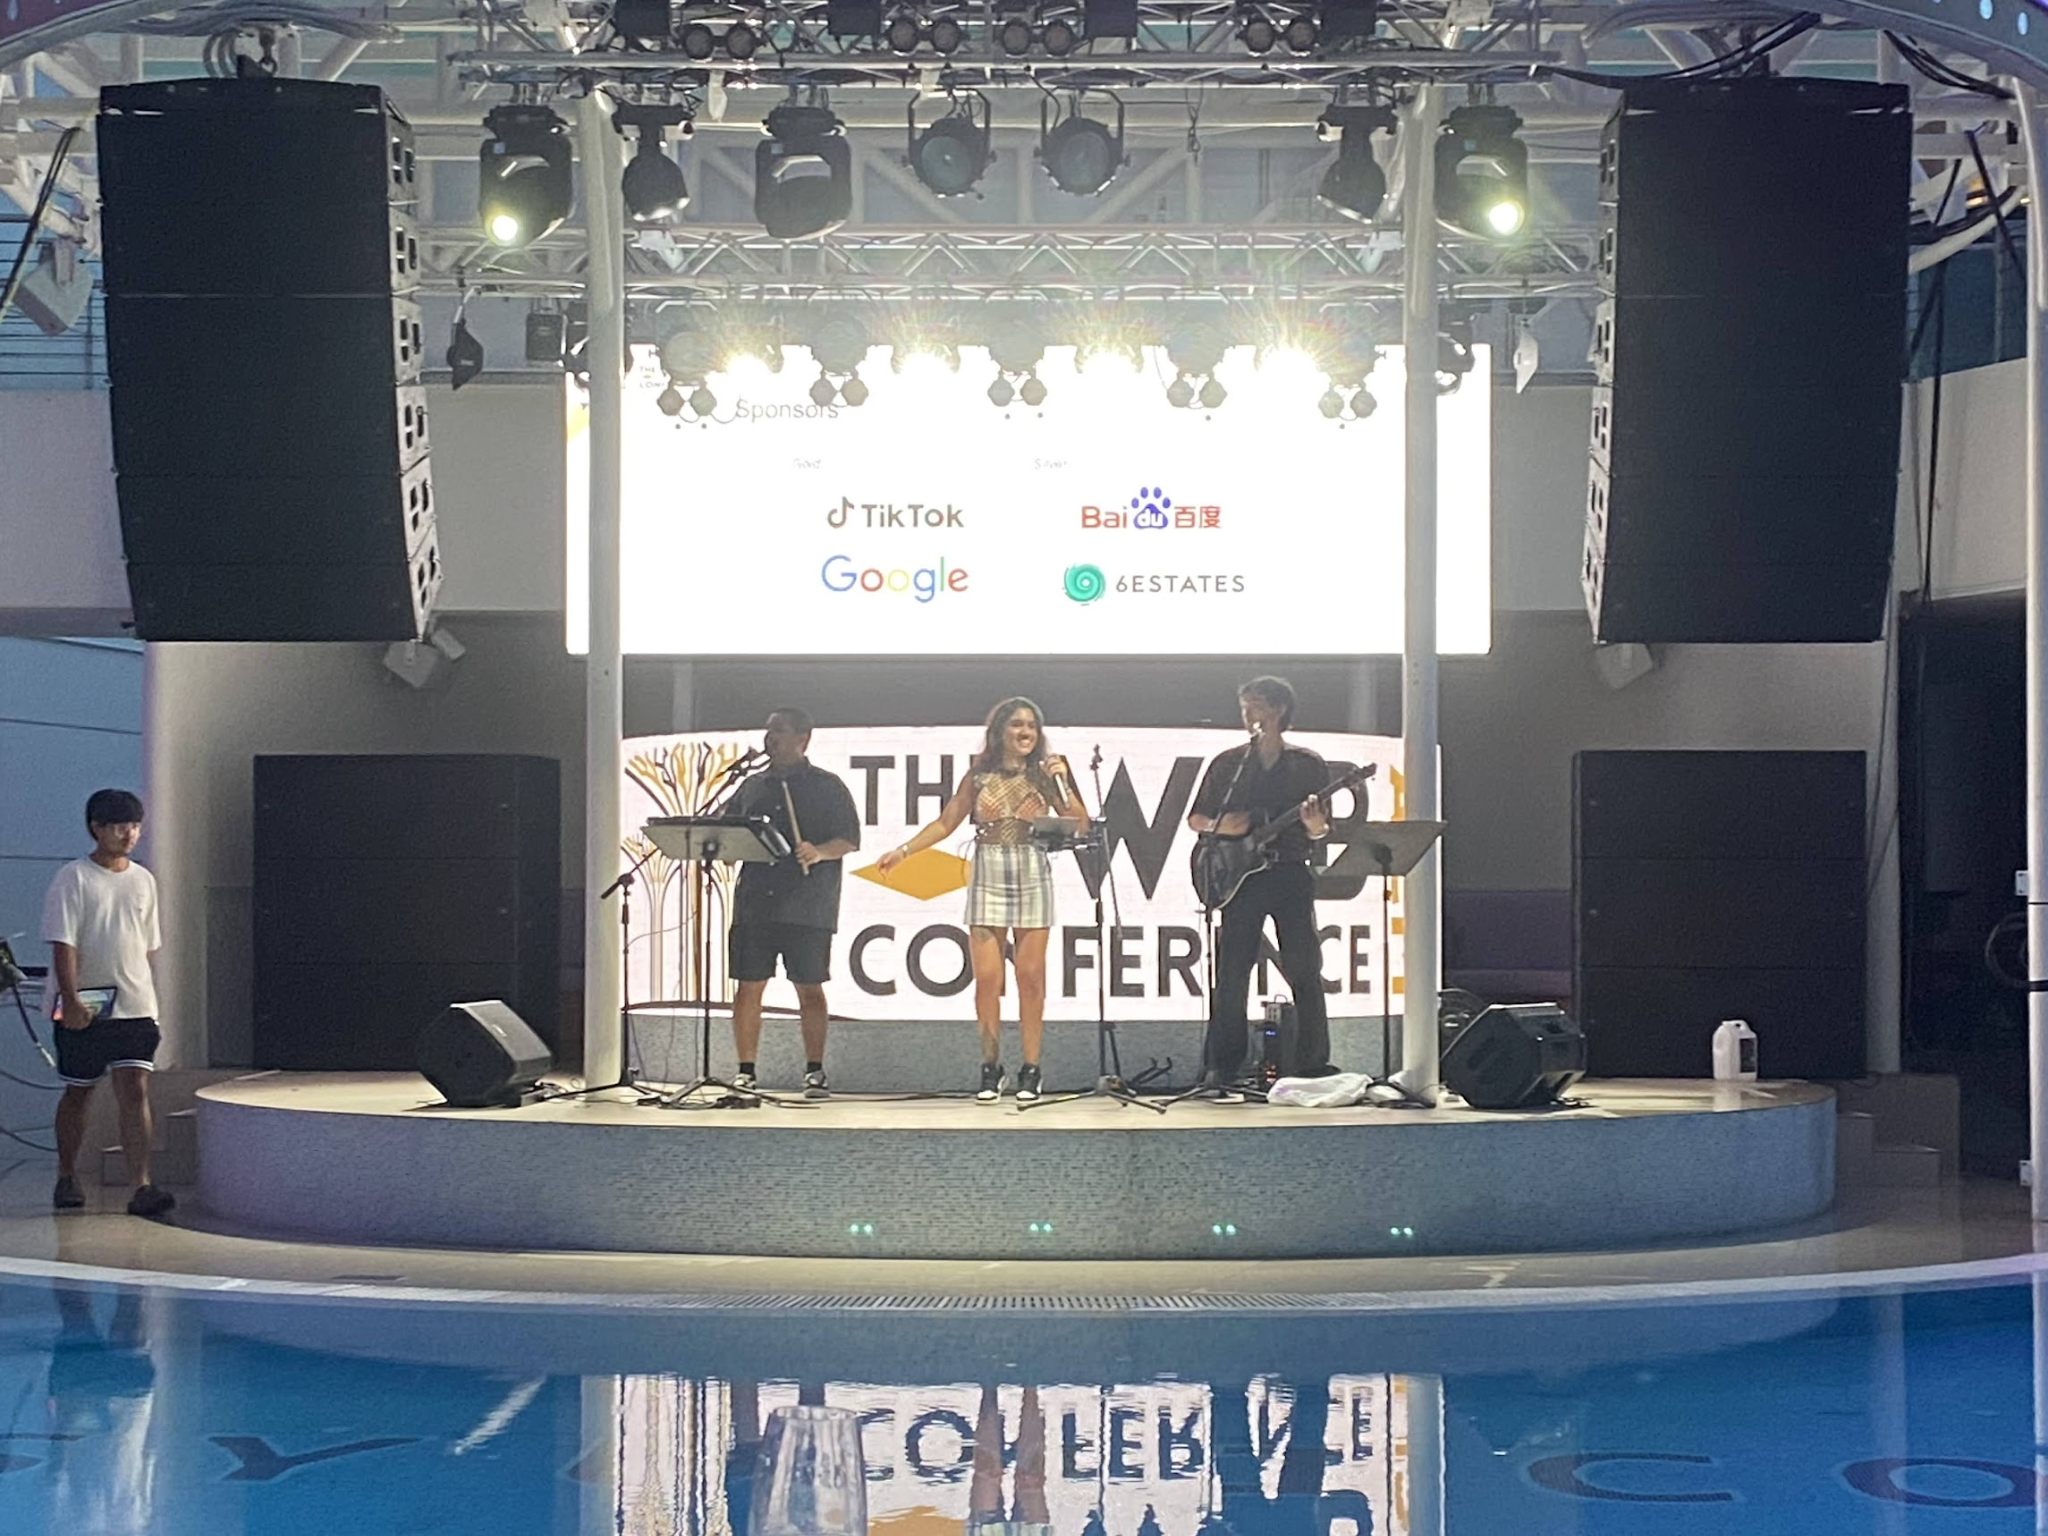 A band playing on a stage. In front of the stage is a pool. Behind the stage is a screen with a conference slide announcing the sponsors.